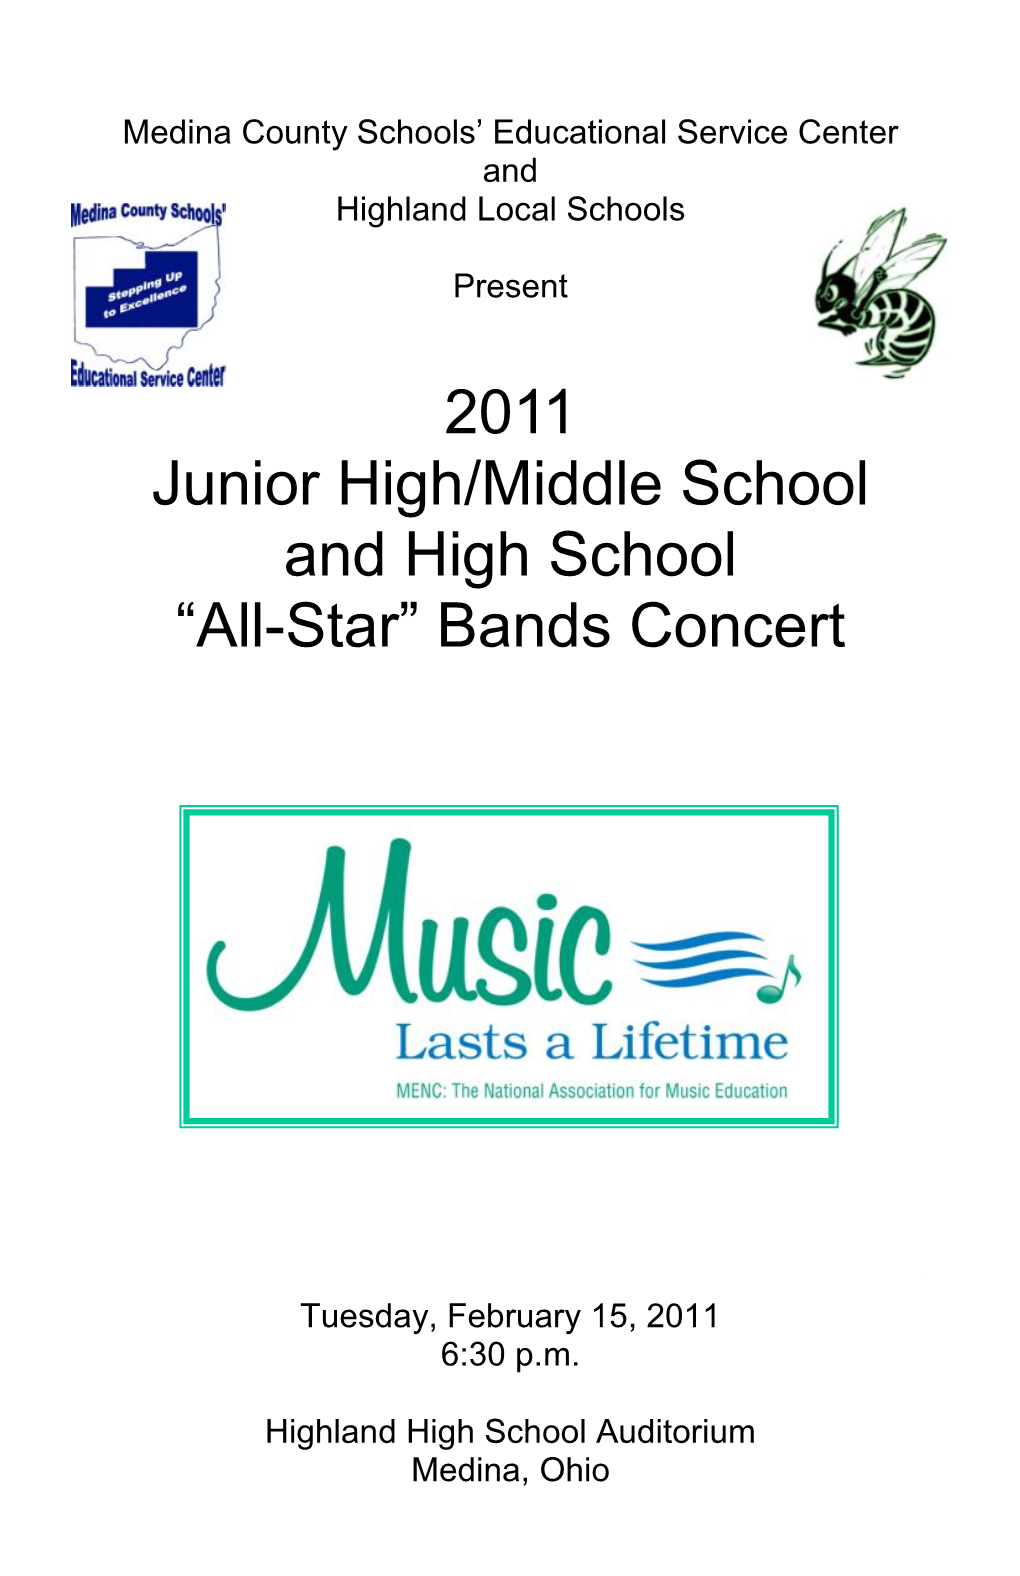 2011 Junior High/Middle School and High School “All-Star” Bands Concert